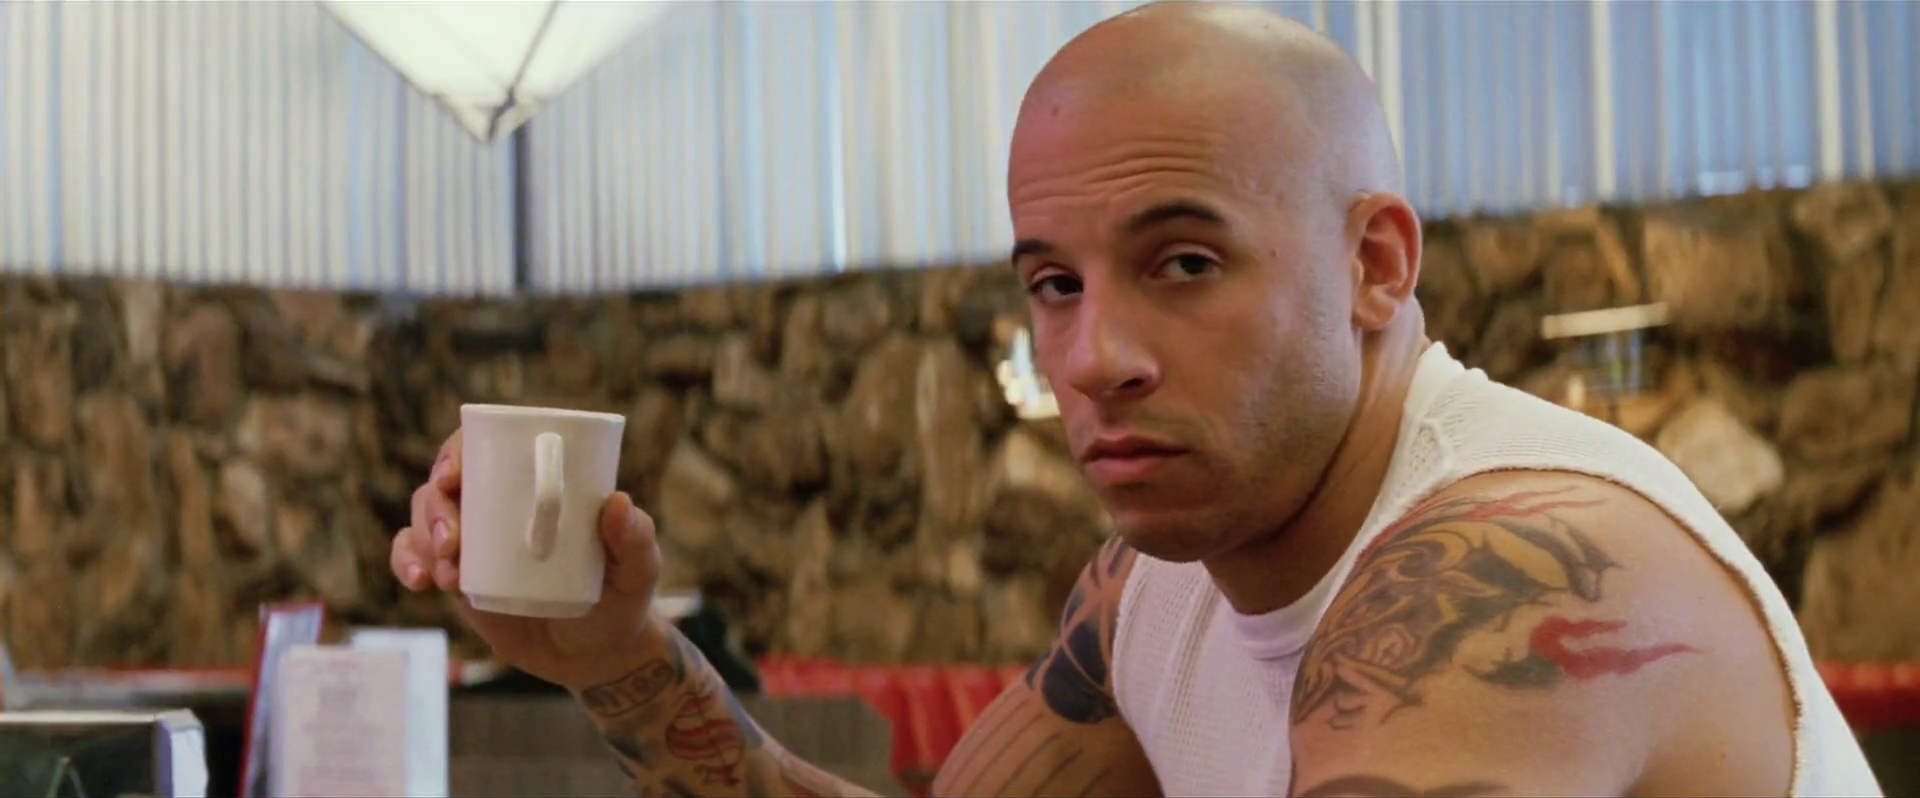 \u0026#39;xXx 3\u0026#39; Gets A New Studio And Full Synopsis - Double Toasted